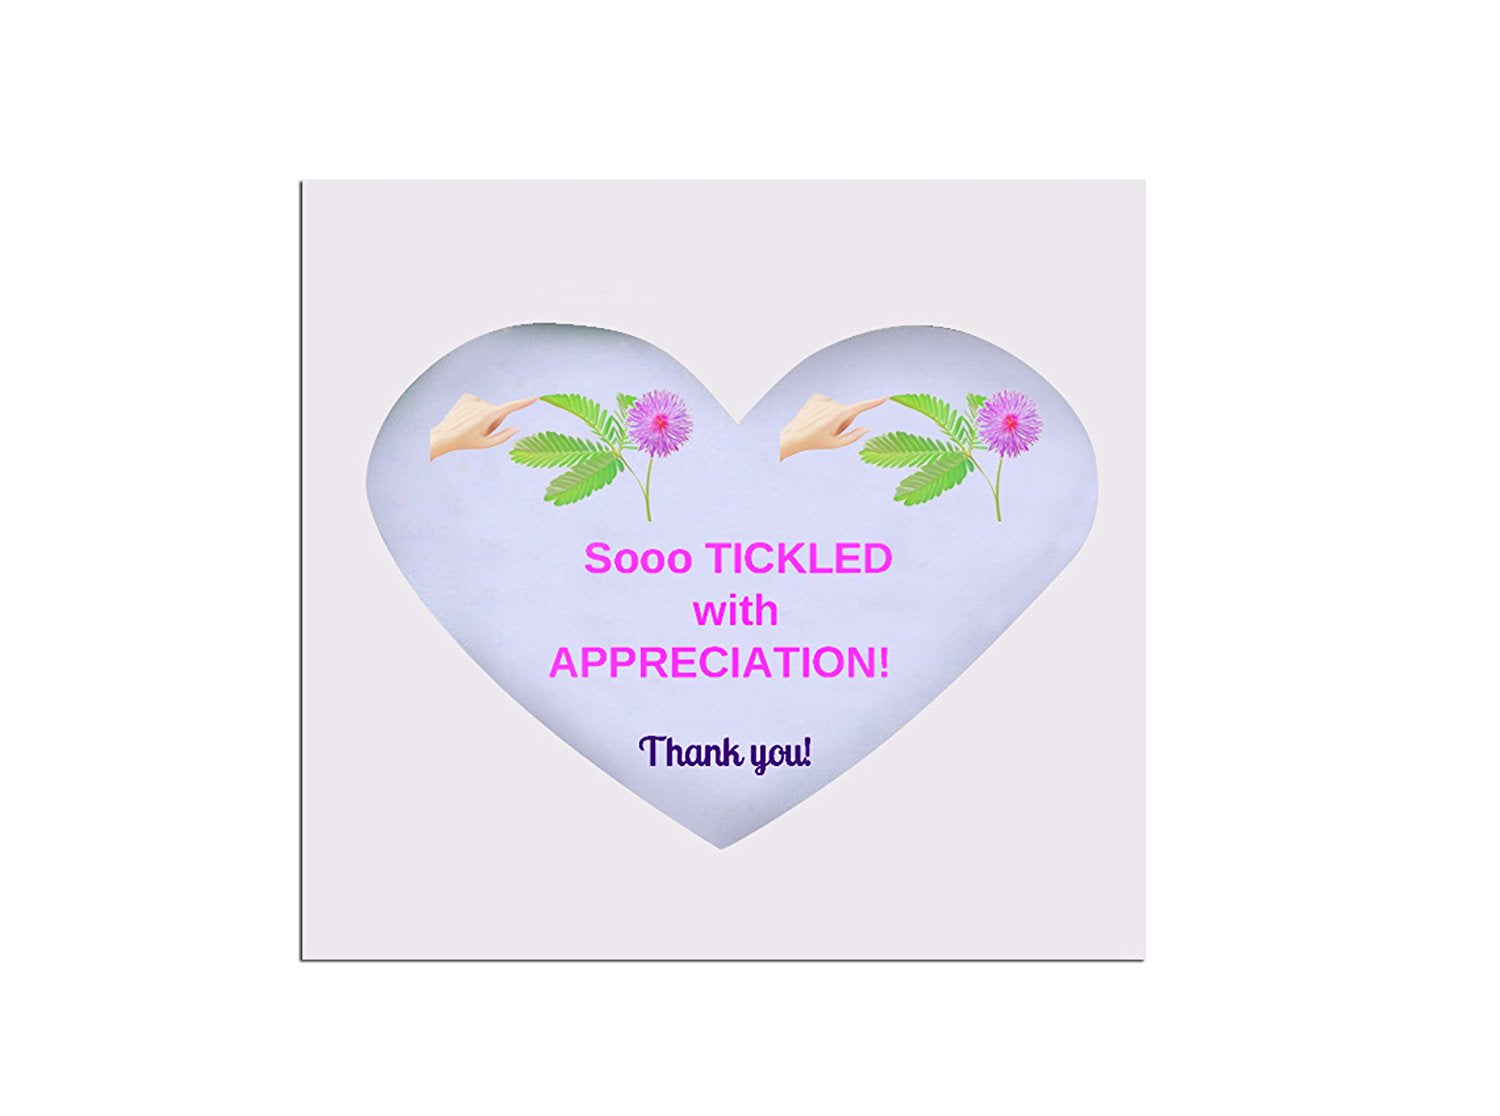 So Tickled With APPRECIATION TickleMe Plant Gift Box set! - TickleMe Plant Company, Inc